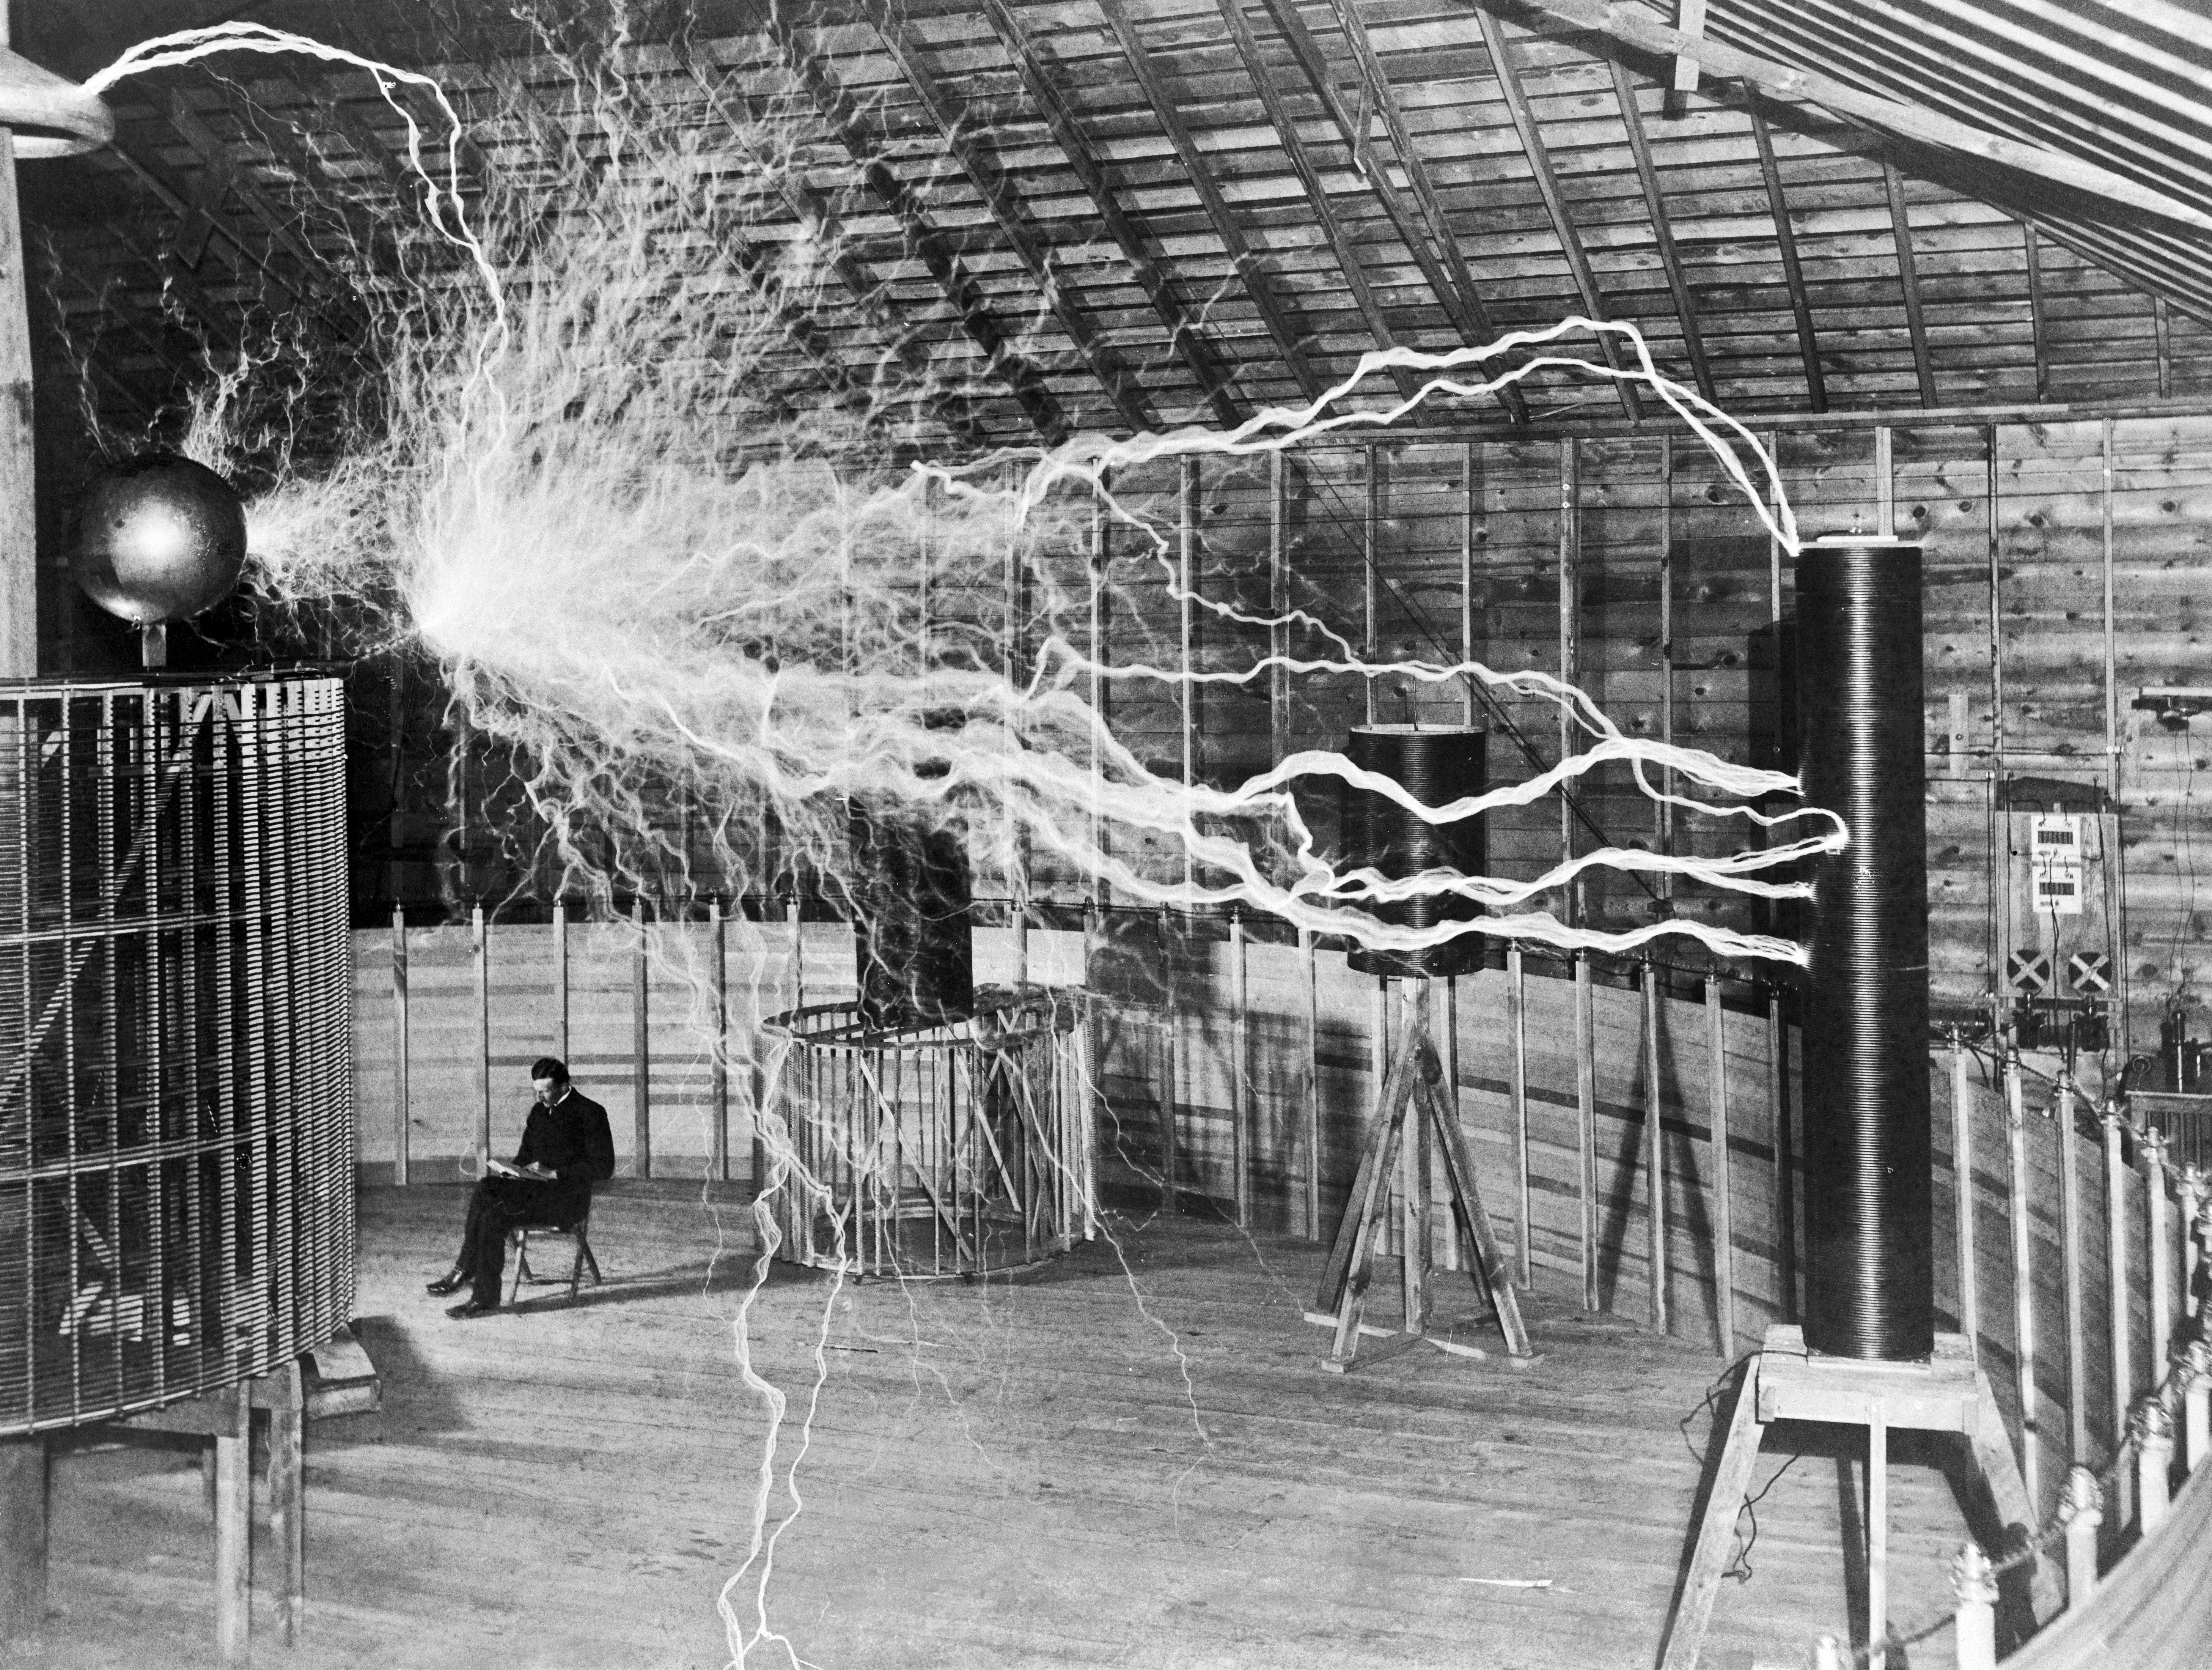 A multiple exposure picture of Tesla sitting next to his "magnifying transmitter" generating millions of volts. The 7-metre (23 ft) long arcs were not part of the normal operation, but only produced for effect by rapidly cycling the power switch.